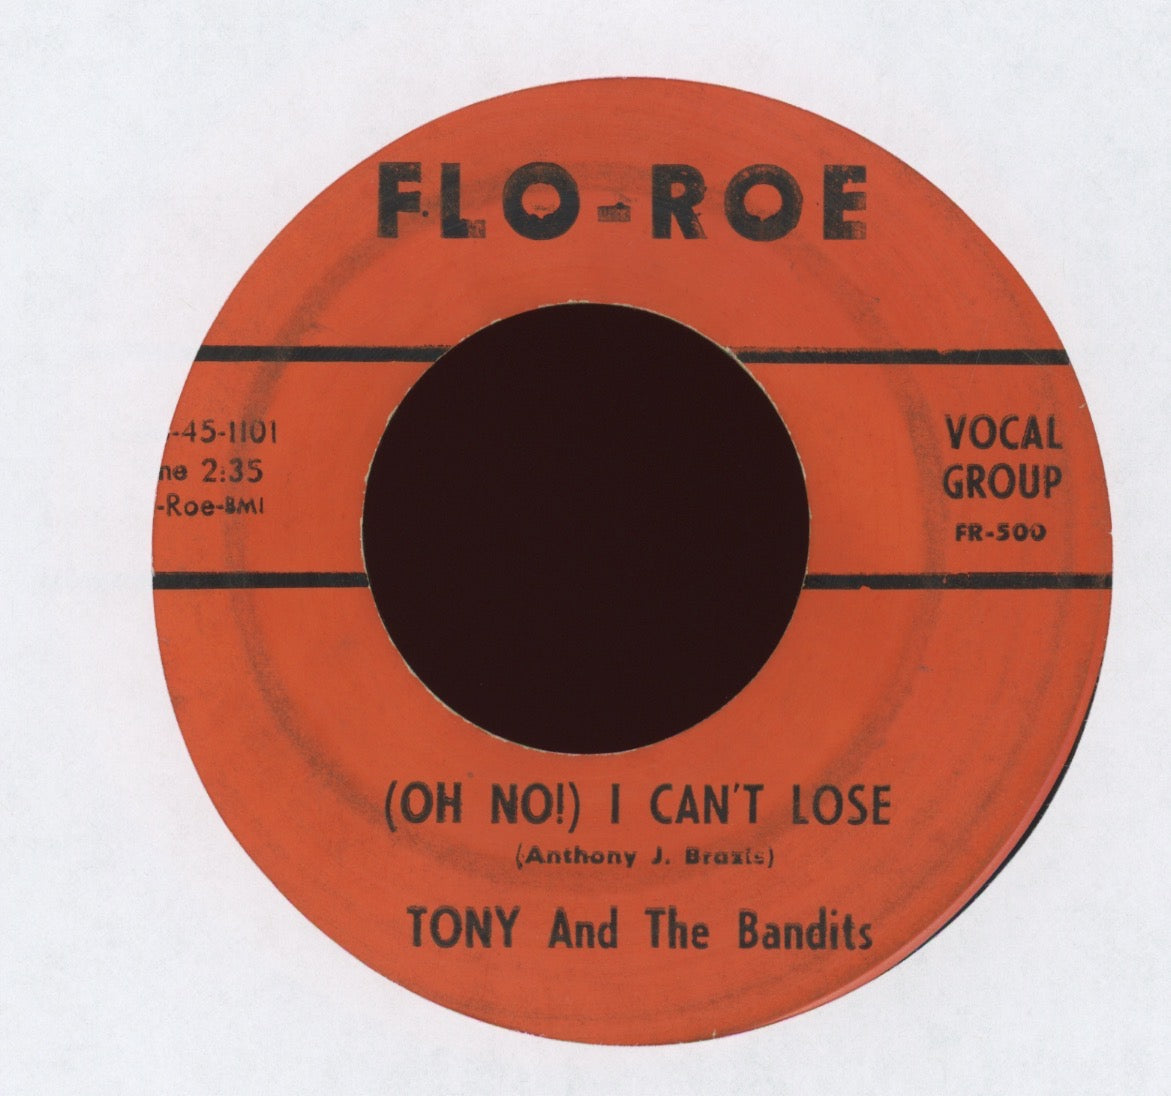 Tony And The Bandits - It's A Bit Of Alright on Flo-Roe Garage 45